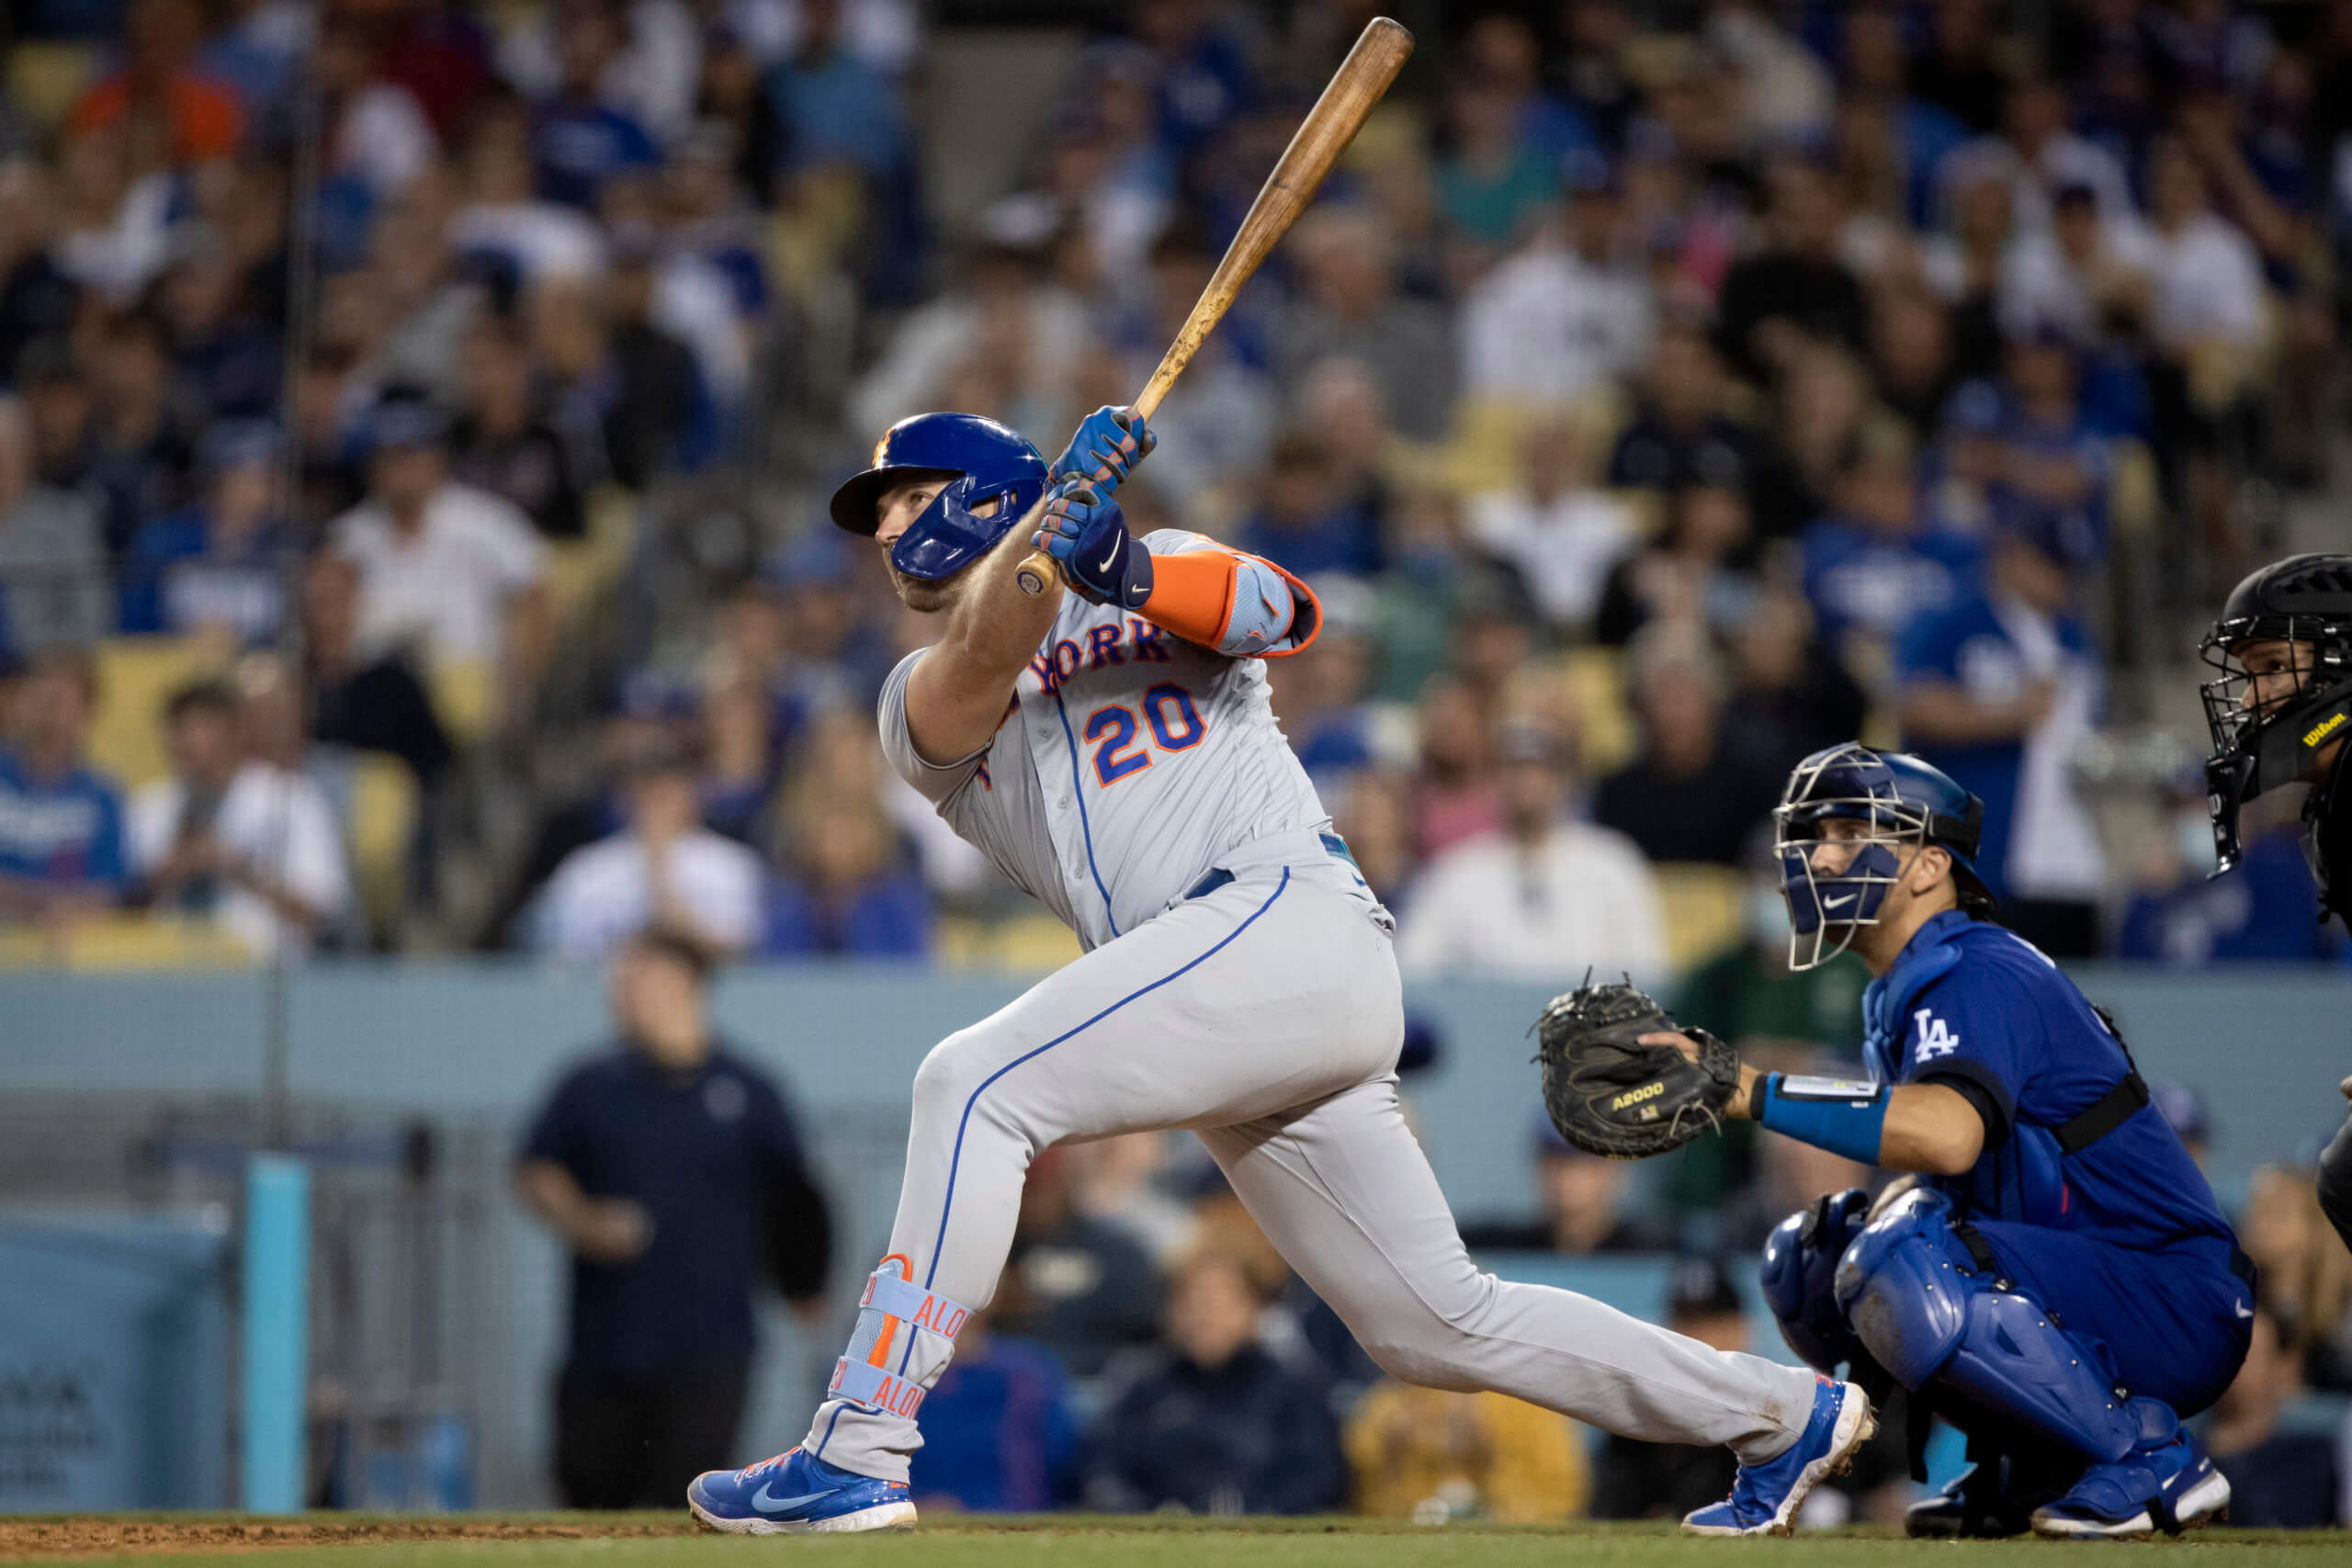 Pete Alonso contract extension: What could Mets deal look like?